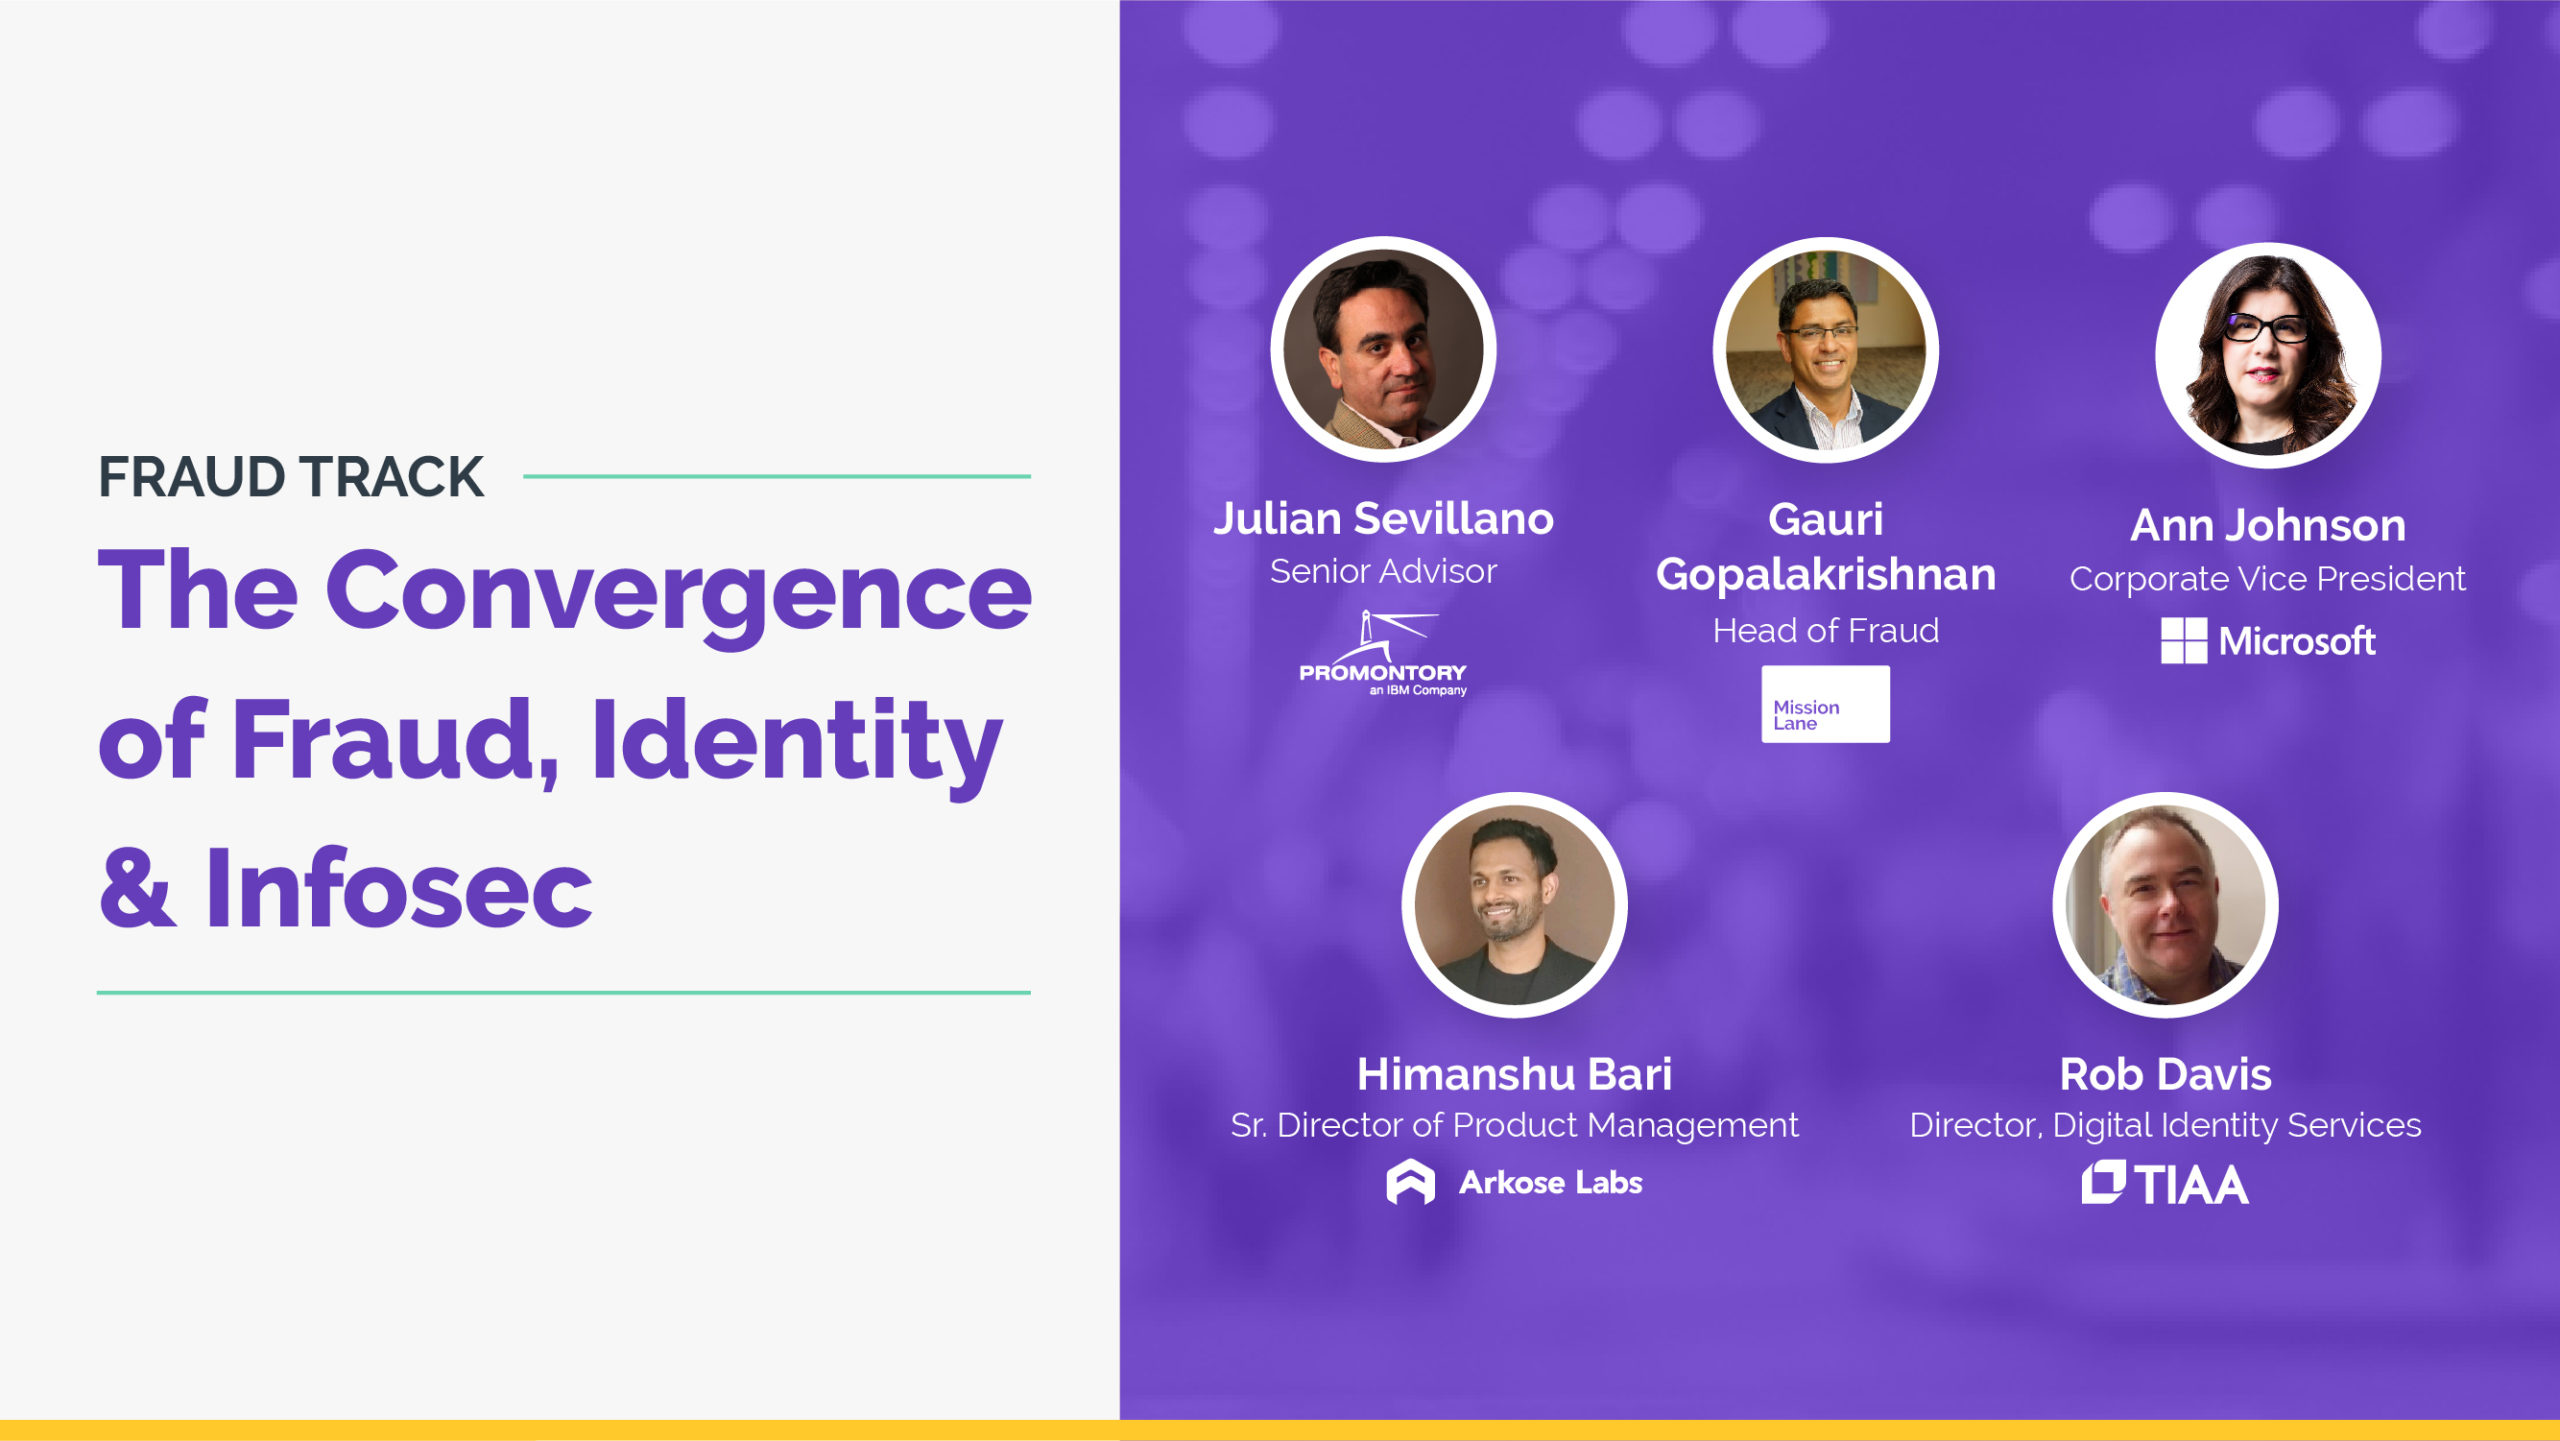 The Convergence of Fraud, Identity & Infosec